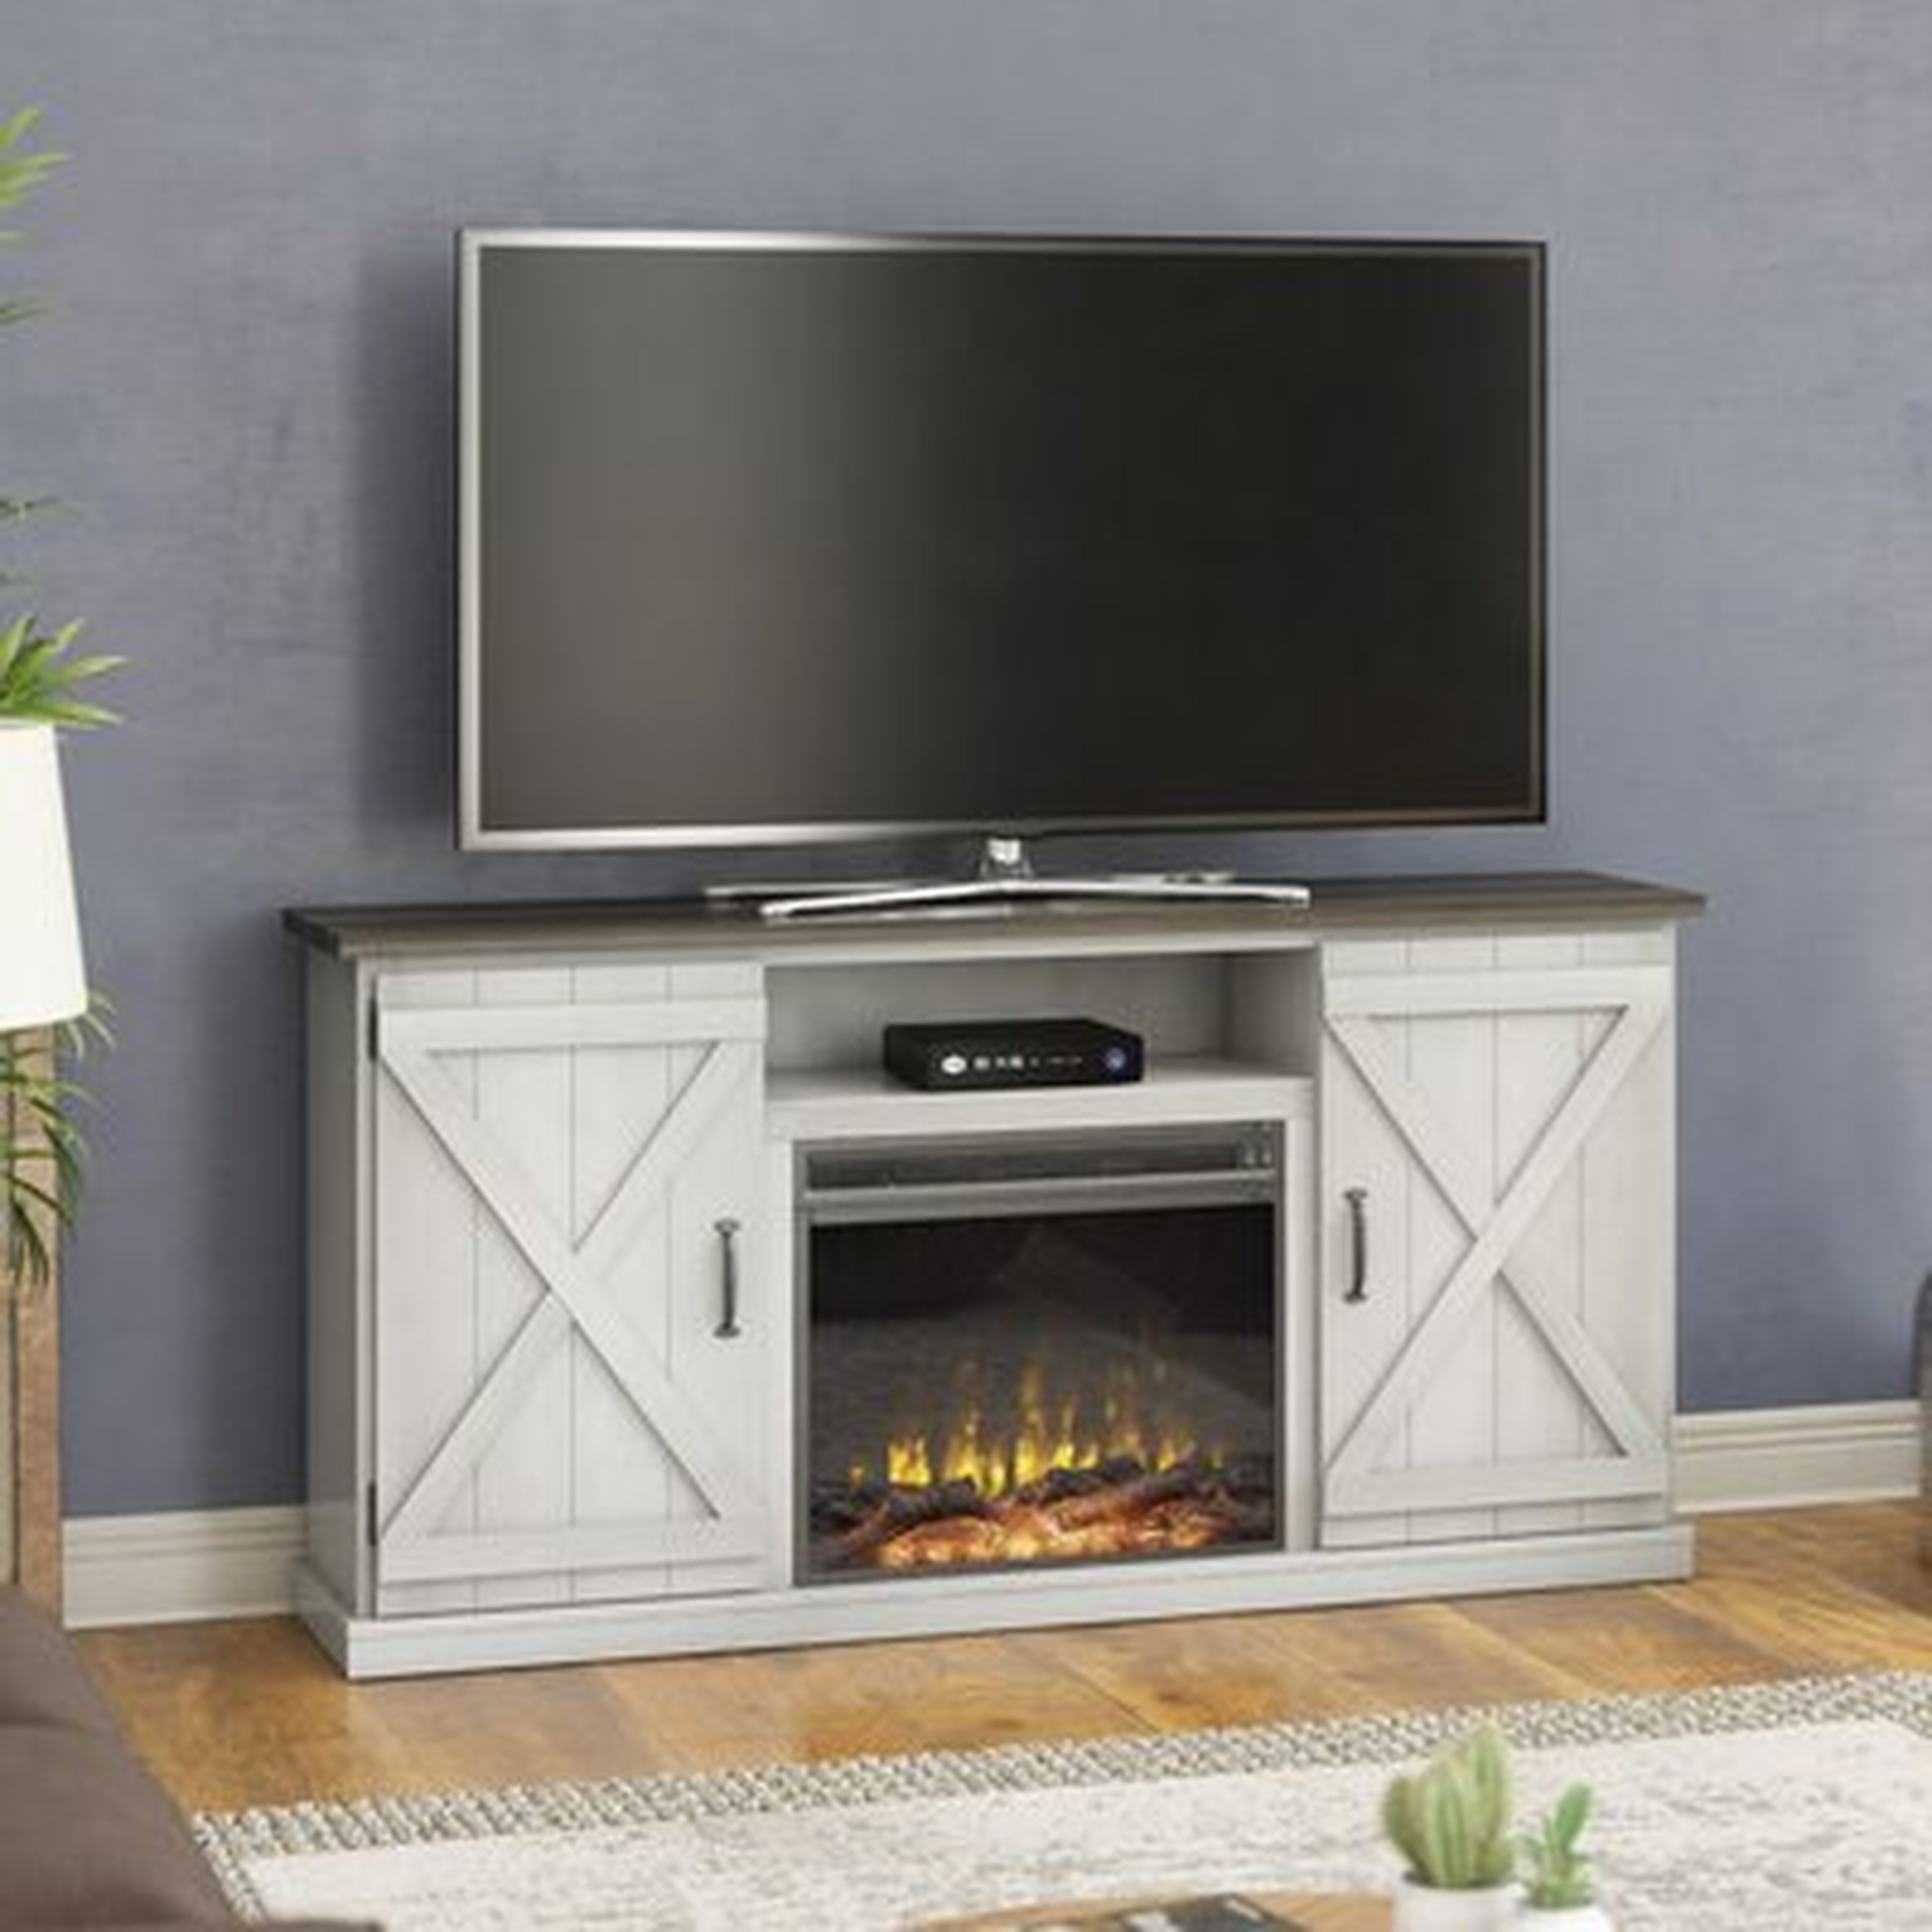 Briella TV Stand for TVs up to 70" with Fireplace Included - Wayfair